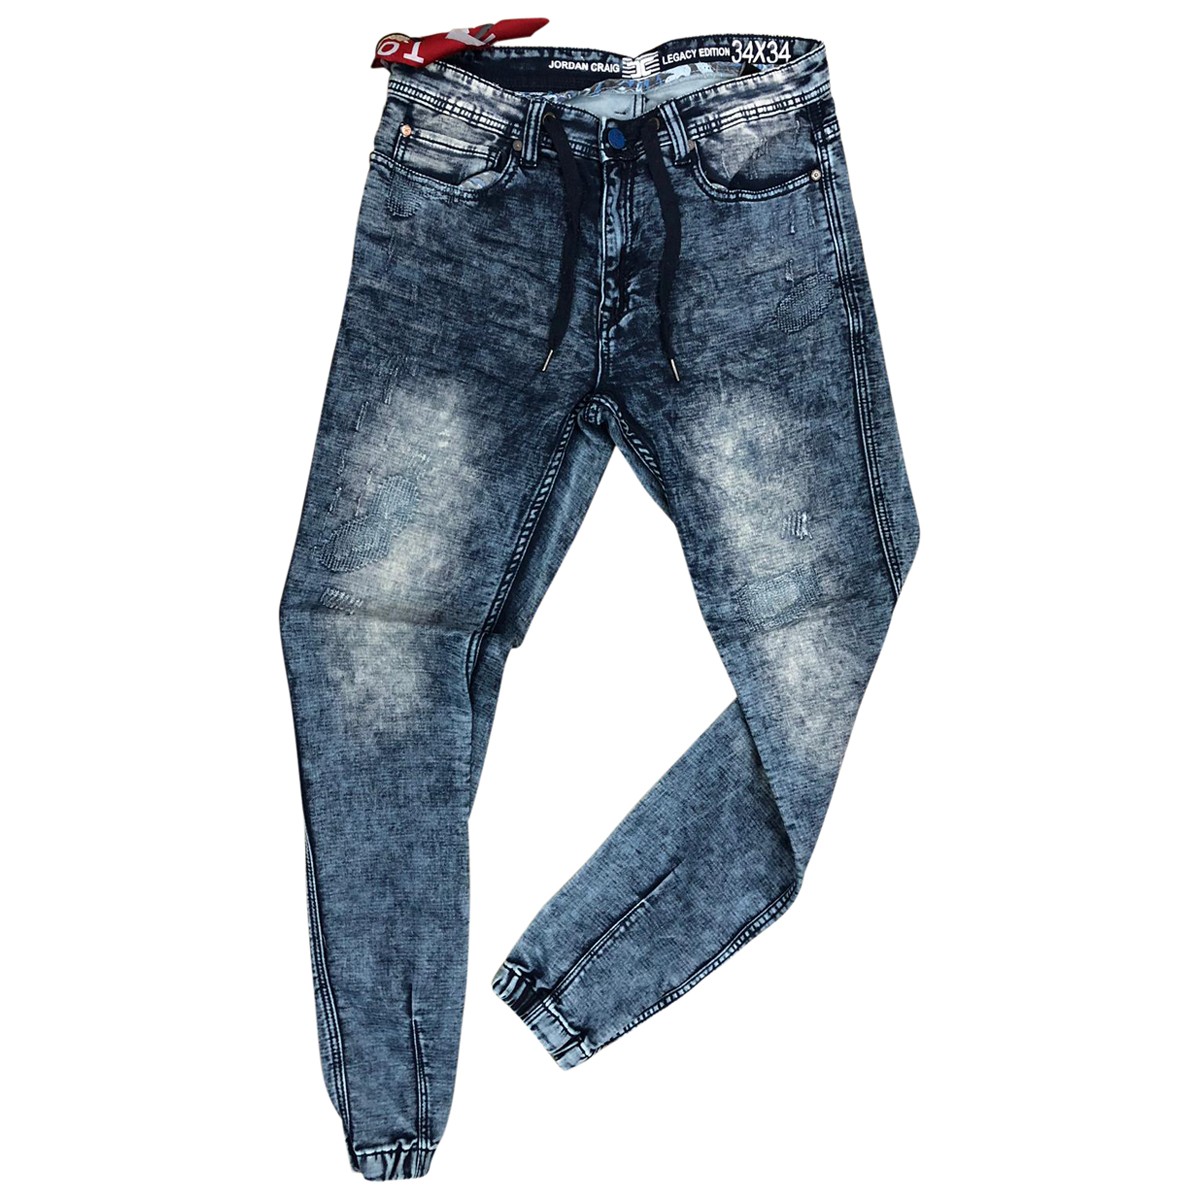 jogger jeans price